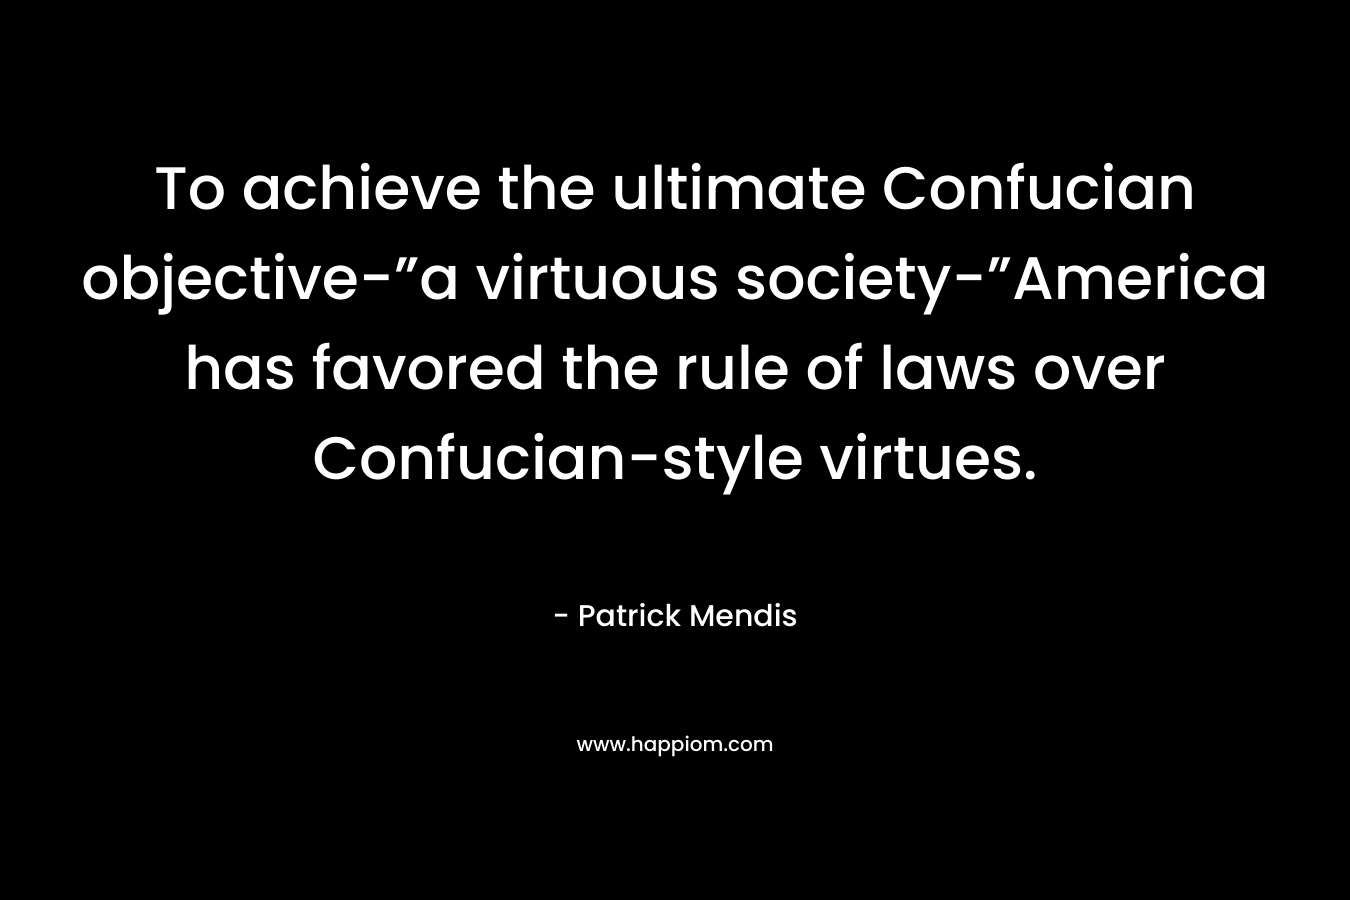 To achieve the ultimate Confucian objective-”a virtuous society-”America has favored the rule of laws over Confucian-style virtues. – Patrick Mendis